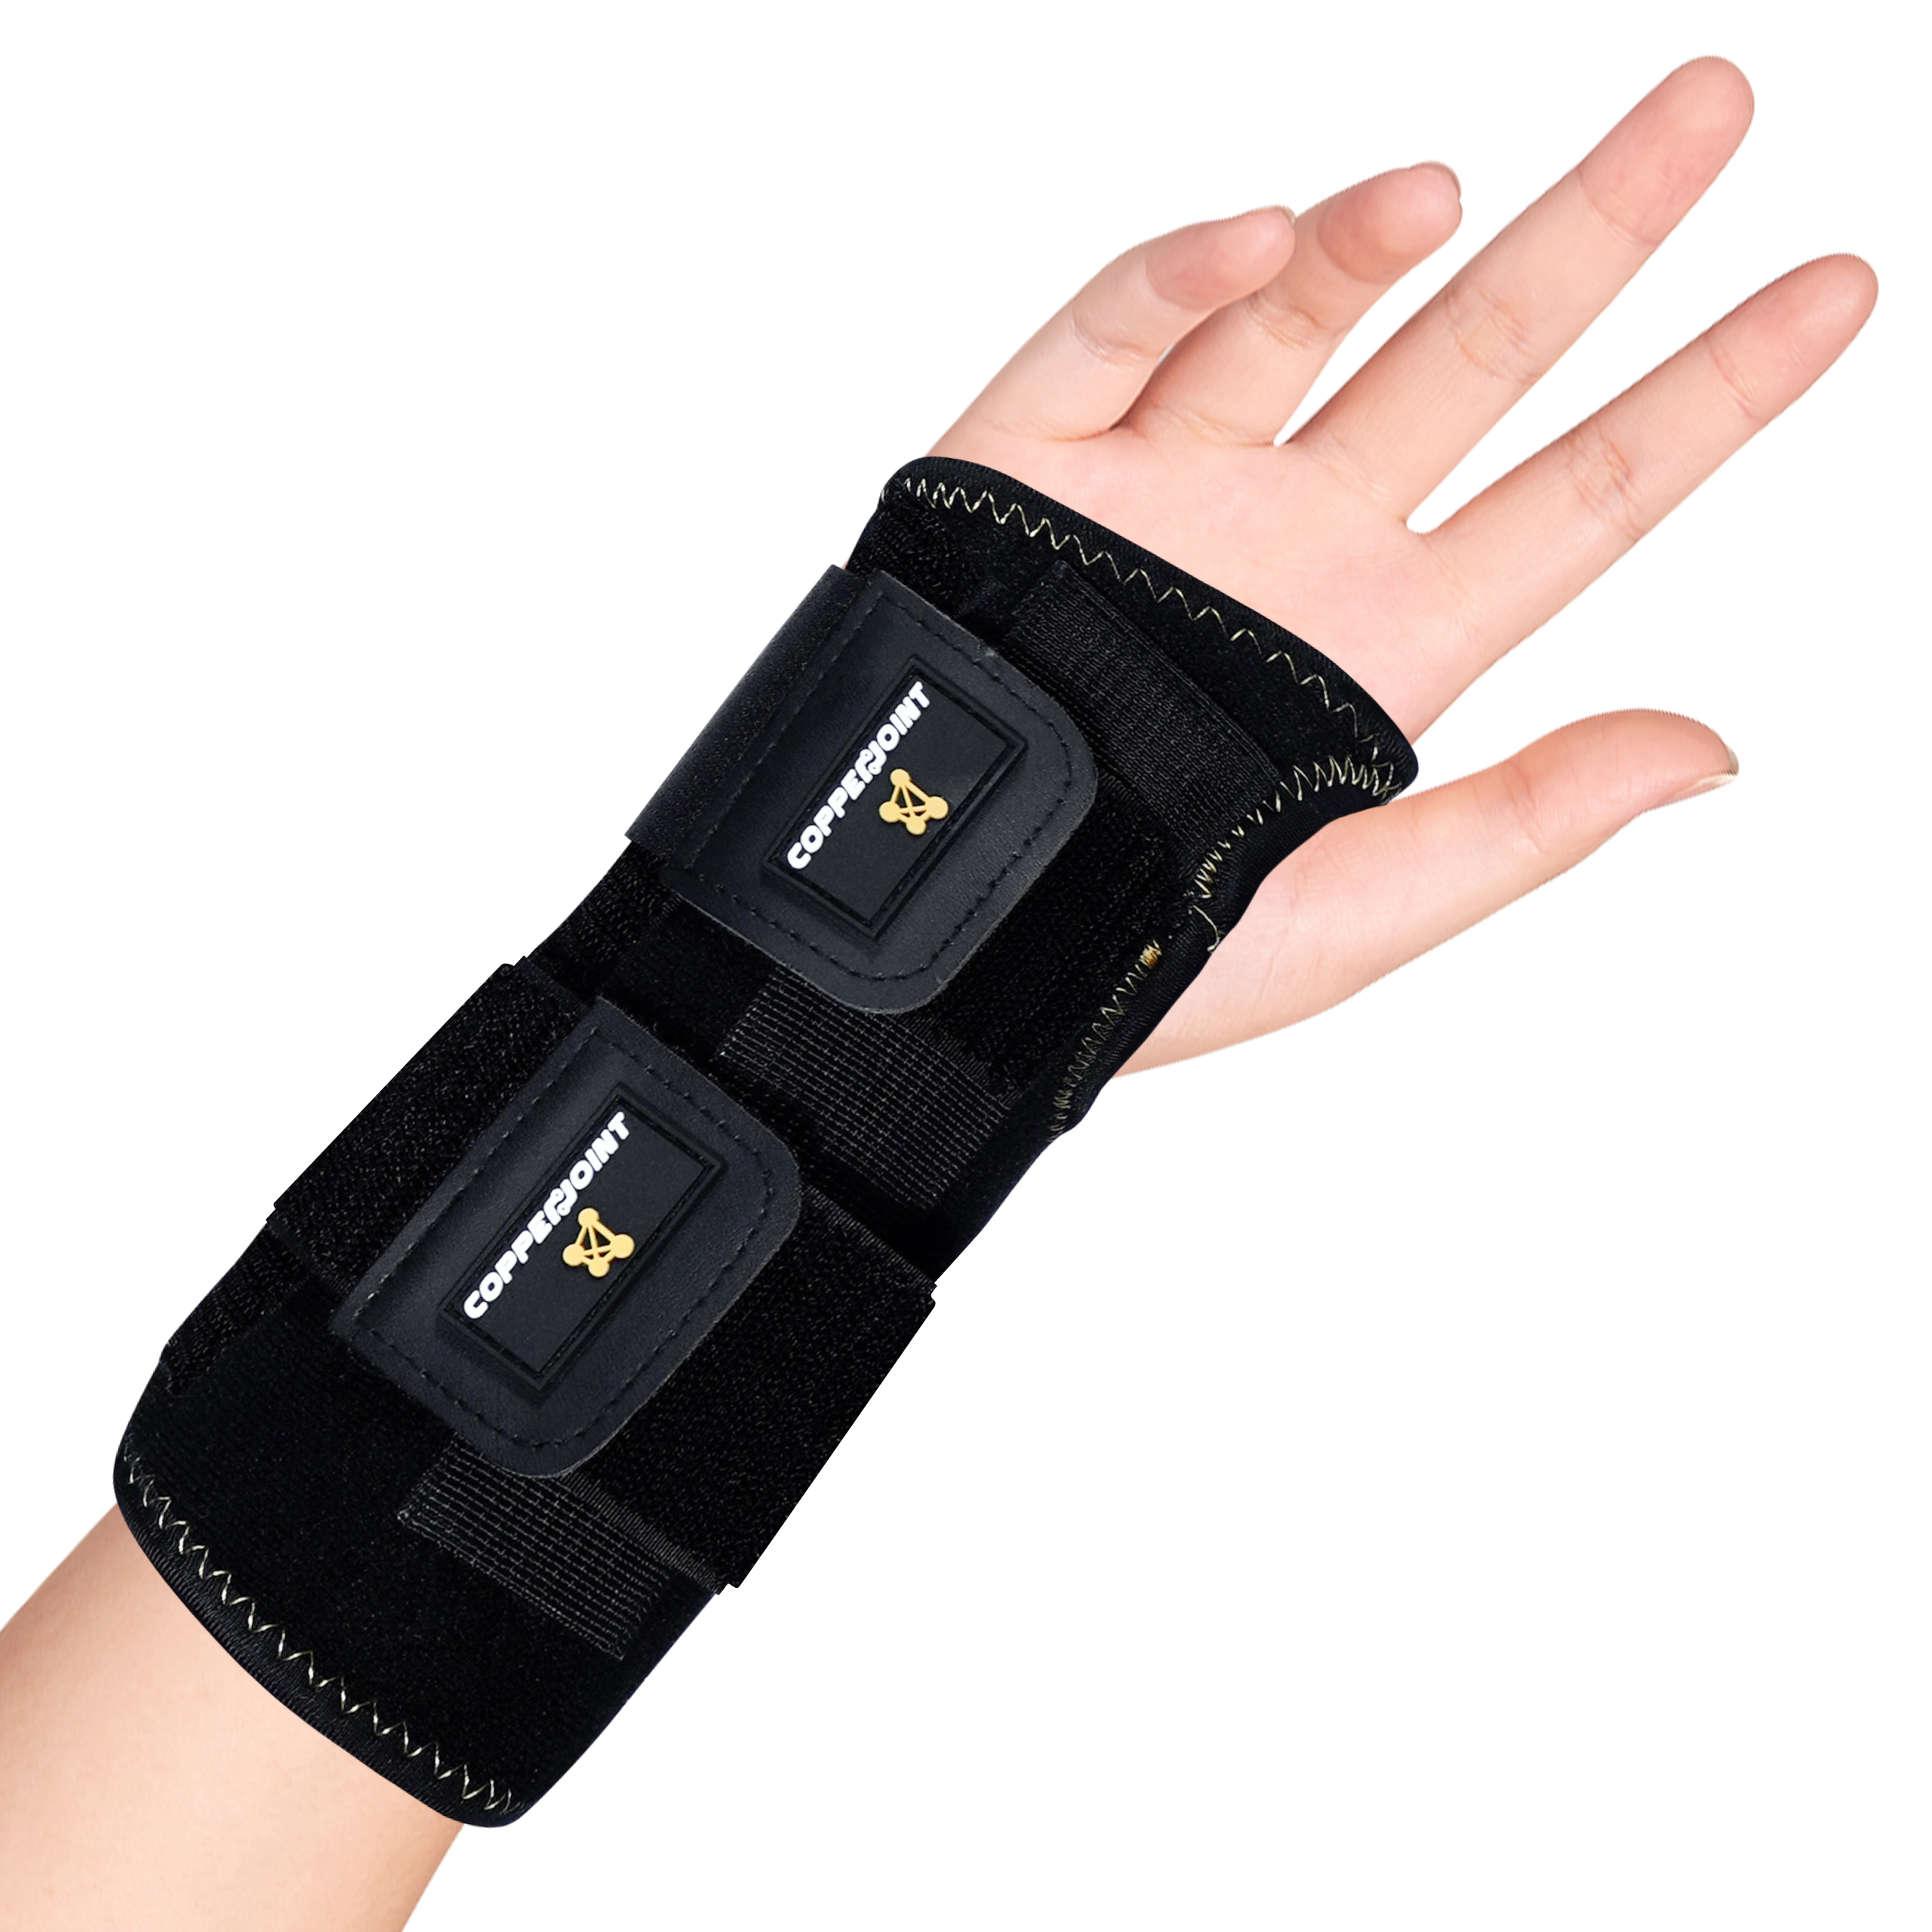 CopperJoint Releases New Wrist Brace